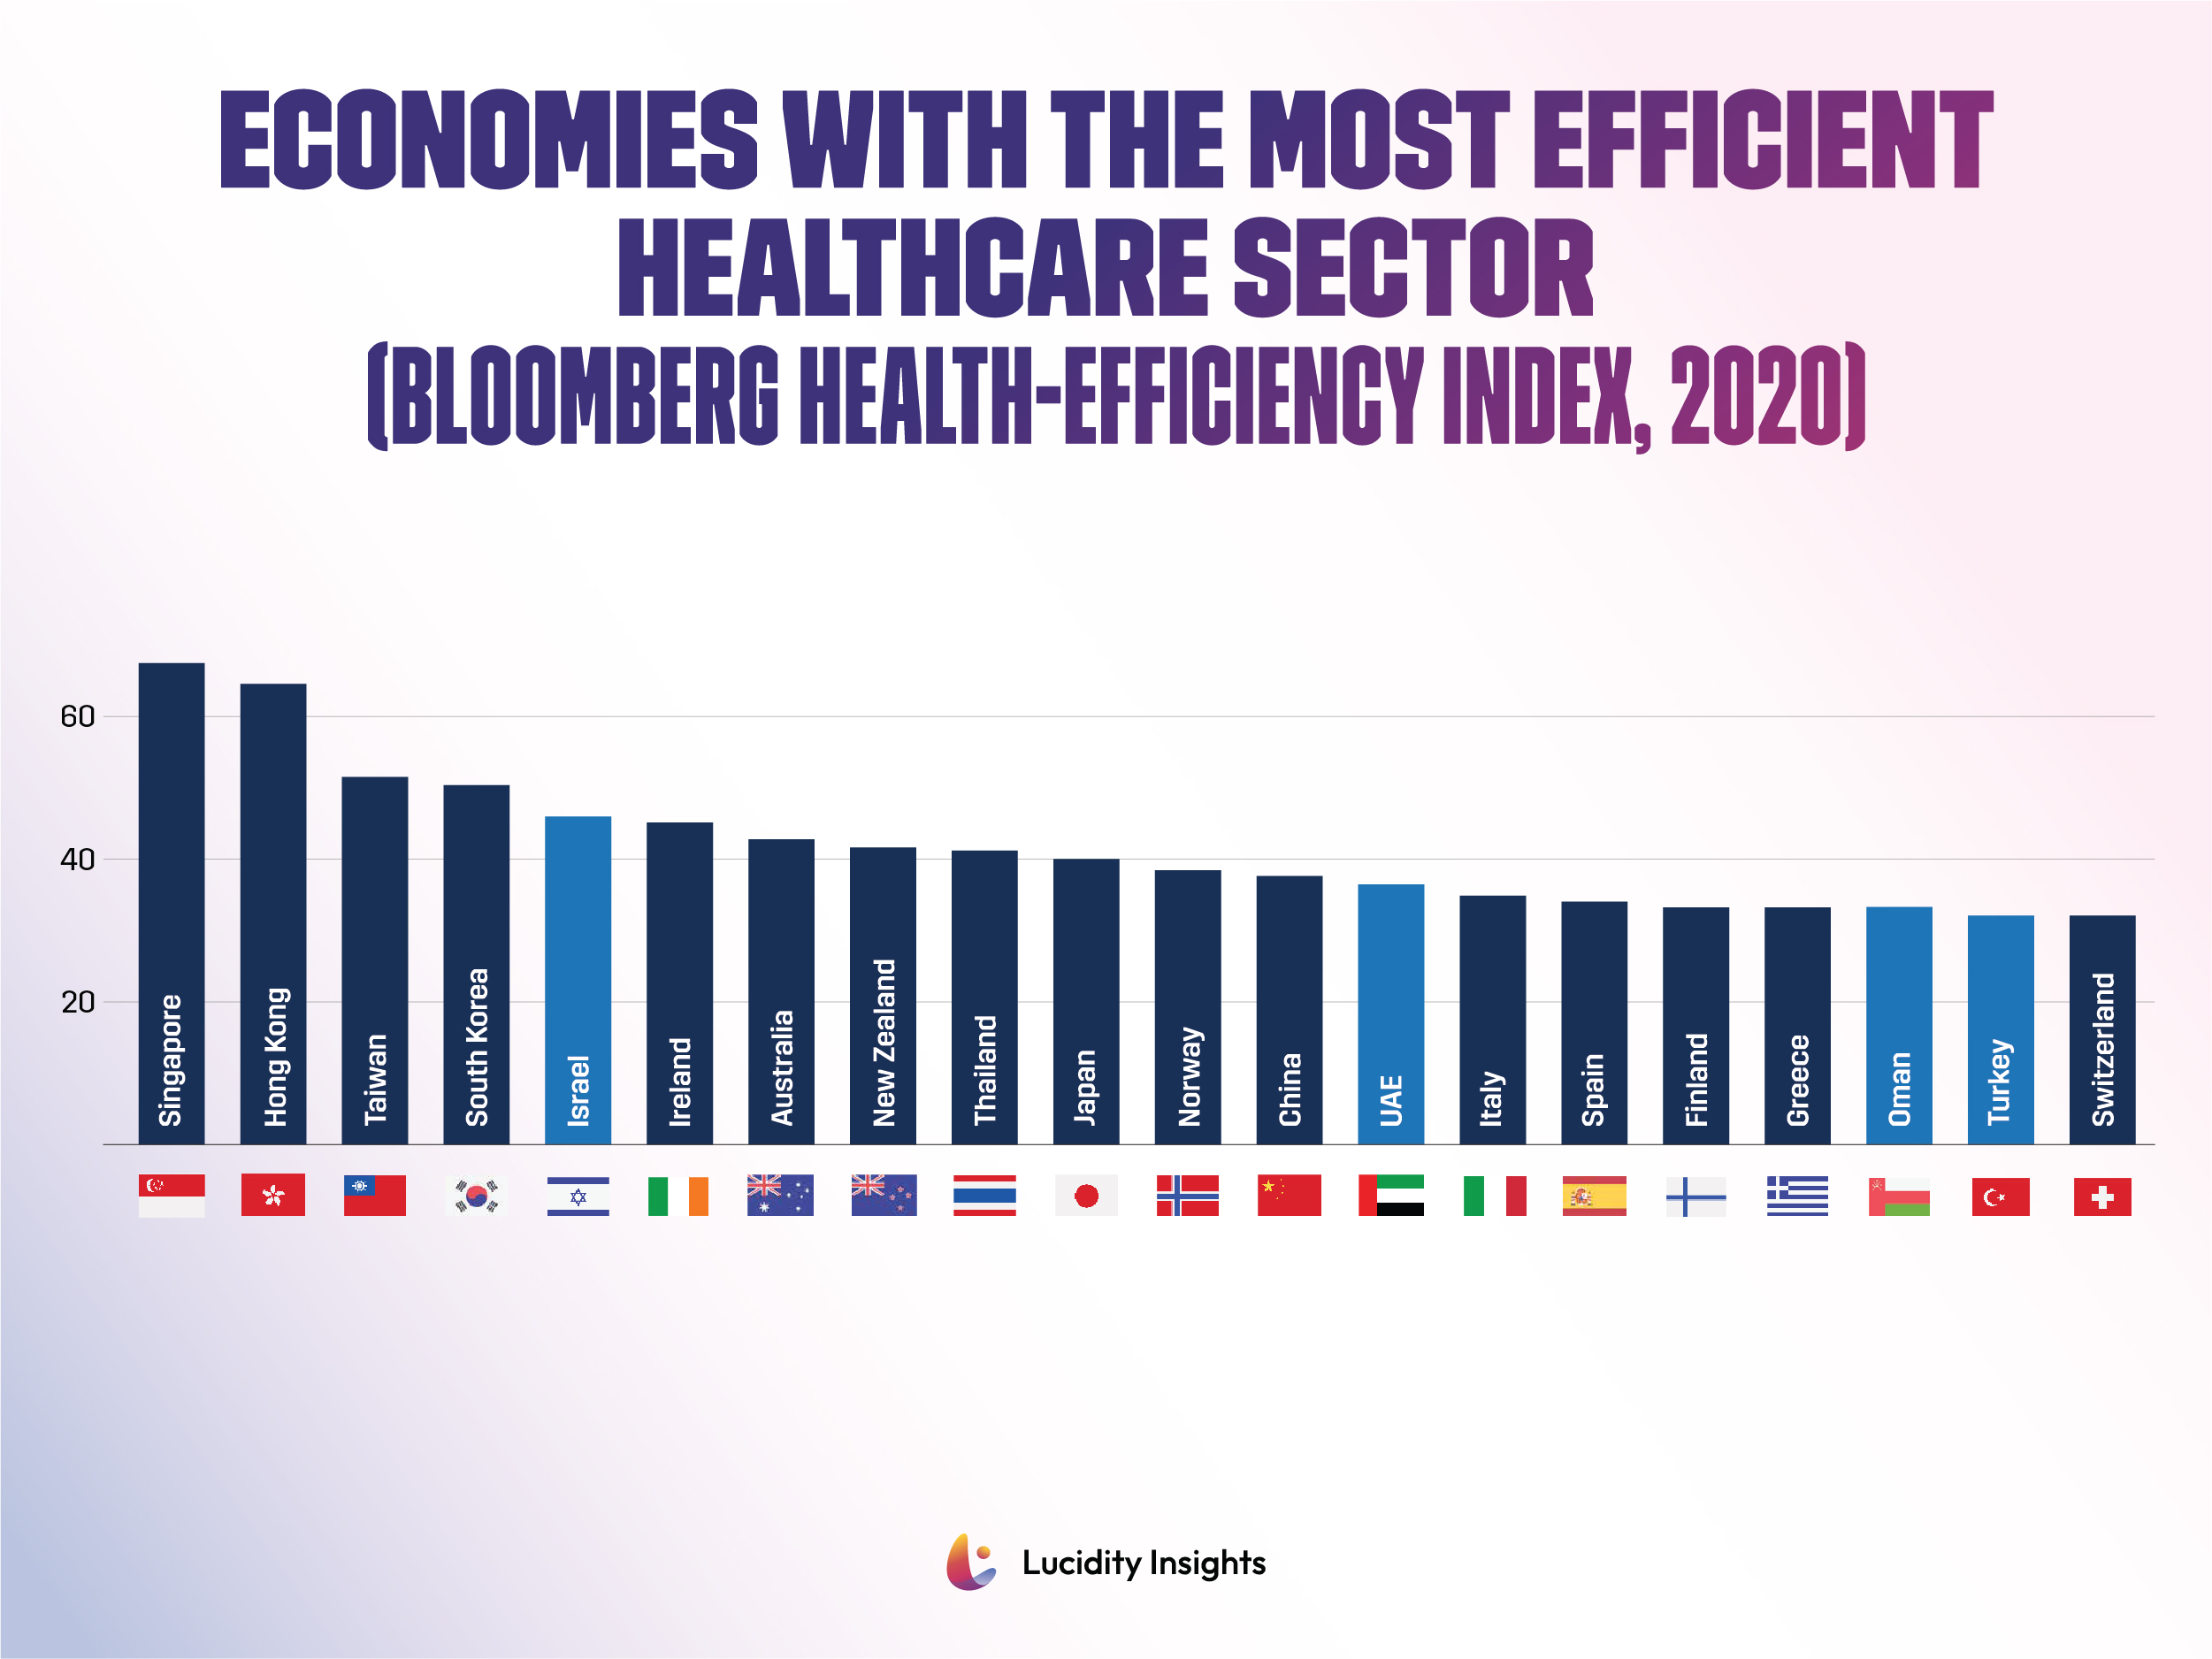 Economies with the Most Efficient Healthcare Sector